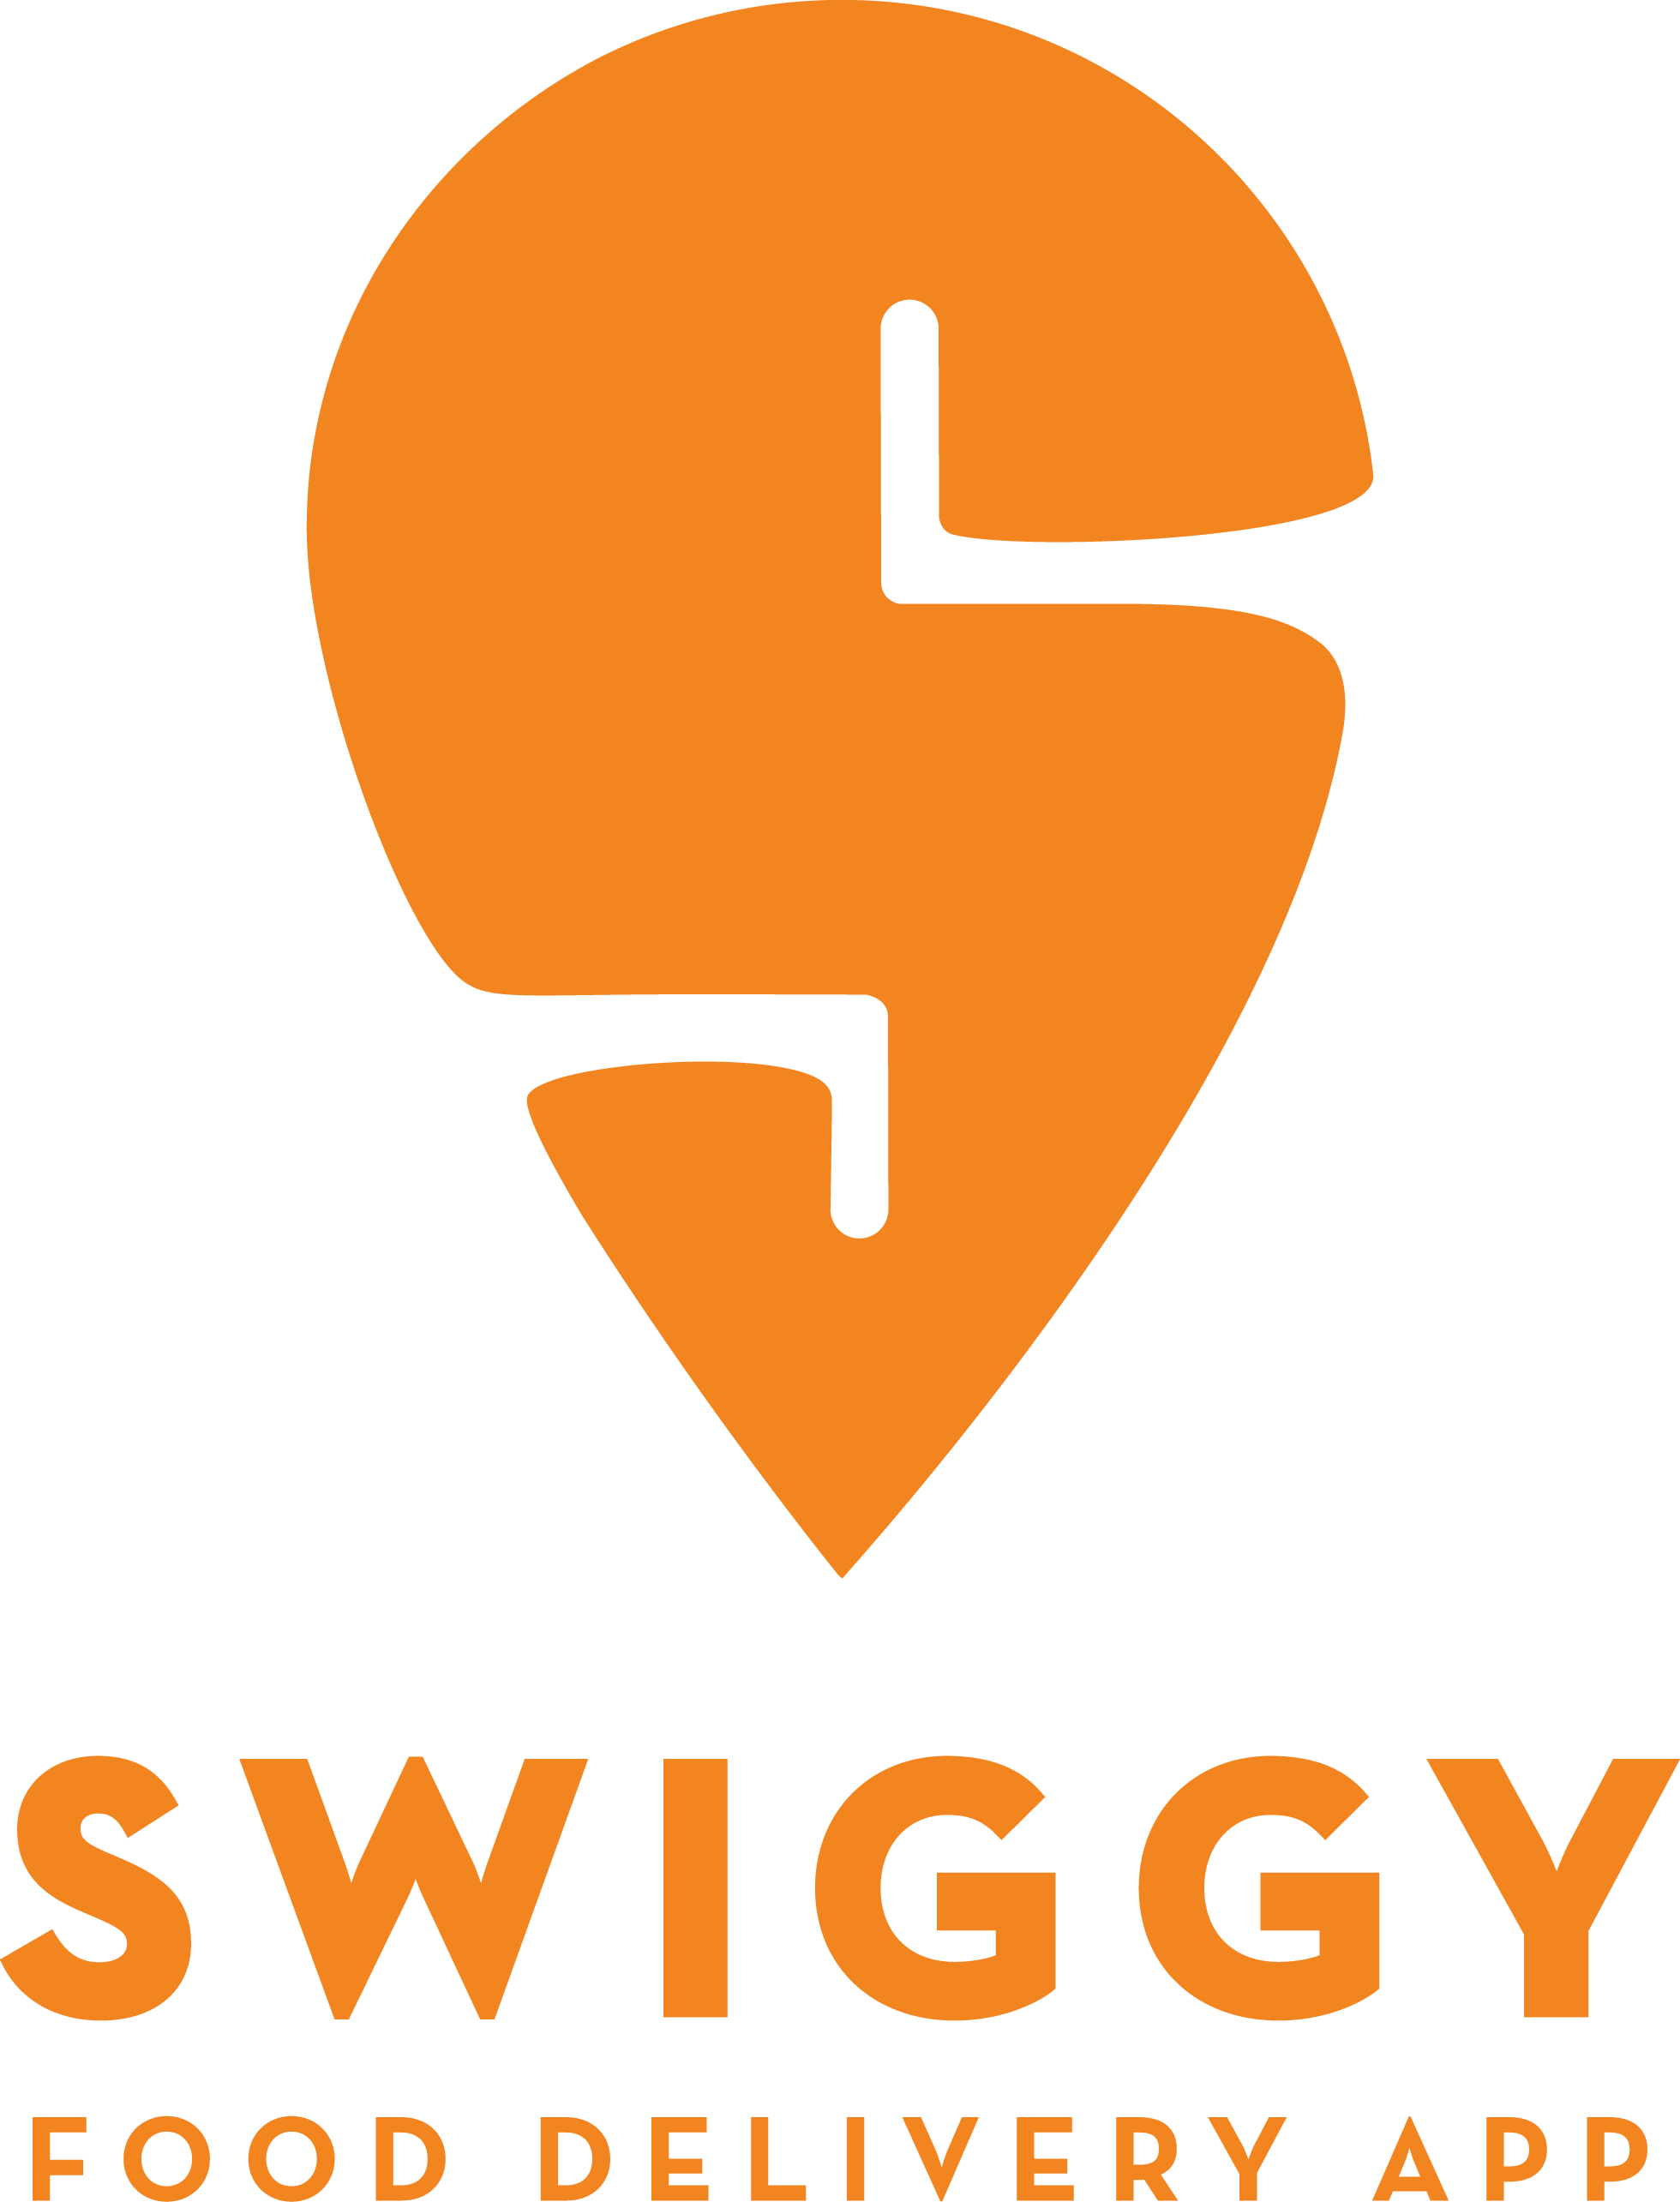 kisspng-swiggy-office-bangalore-logo-chief-executive-deliv-on-off-5ac789f82ef2d9